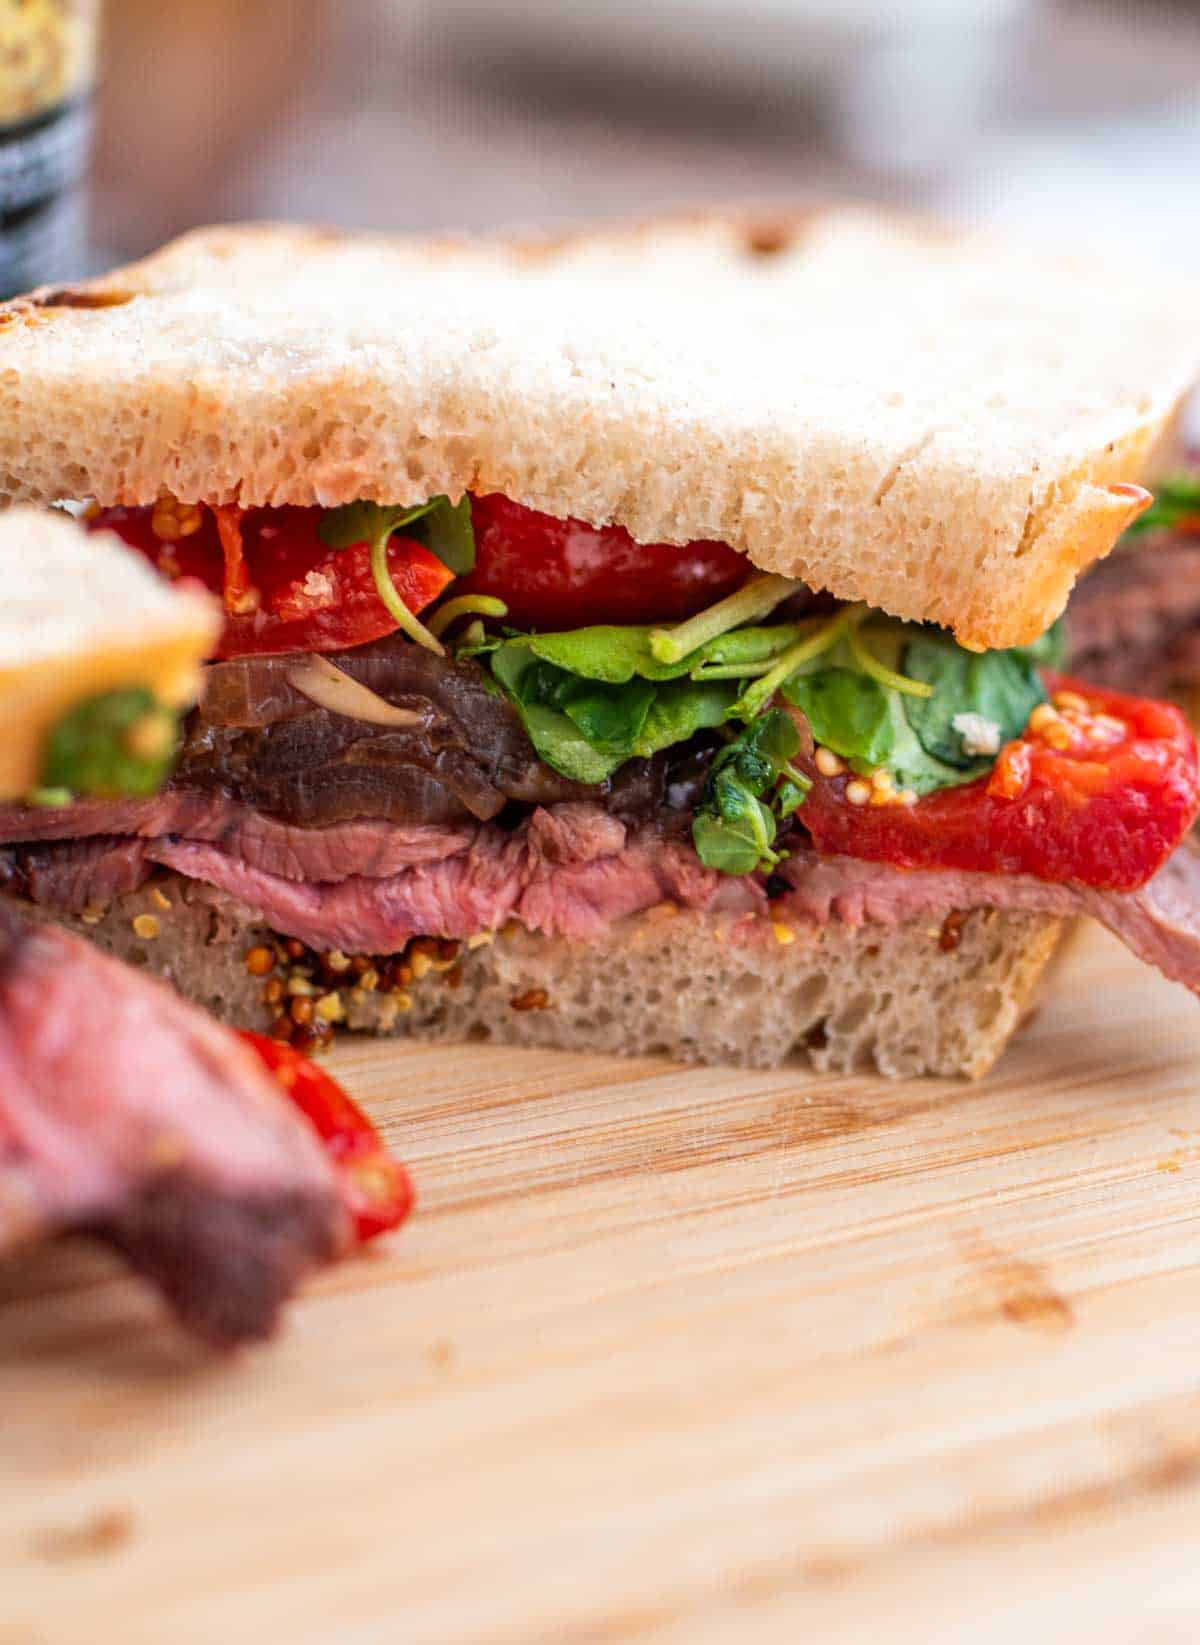 A close-up of a roast beef sandwich with tomatoes, greens, and mustard on whole-grain bread.